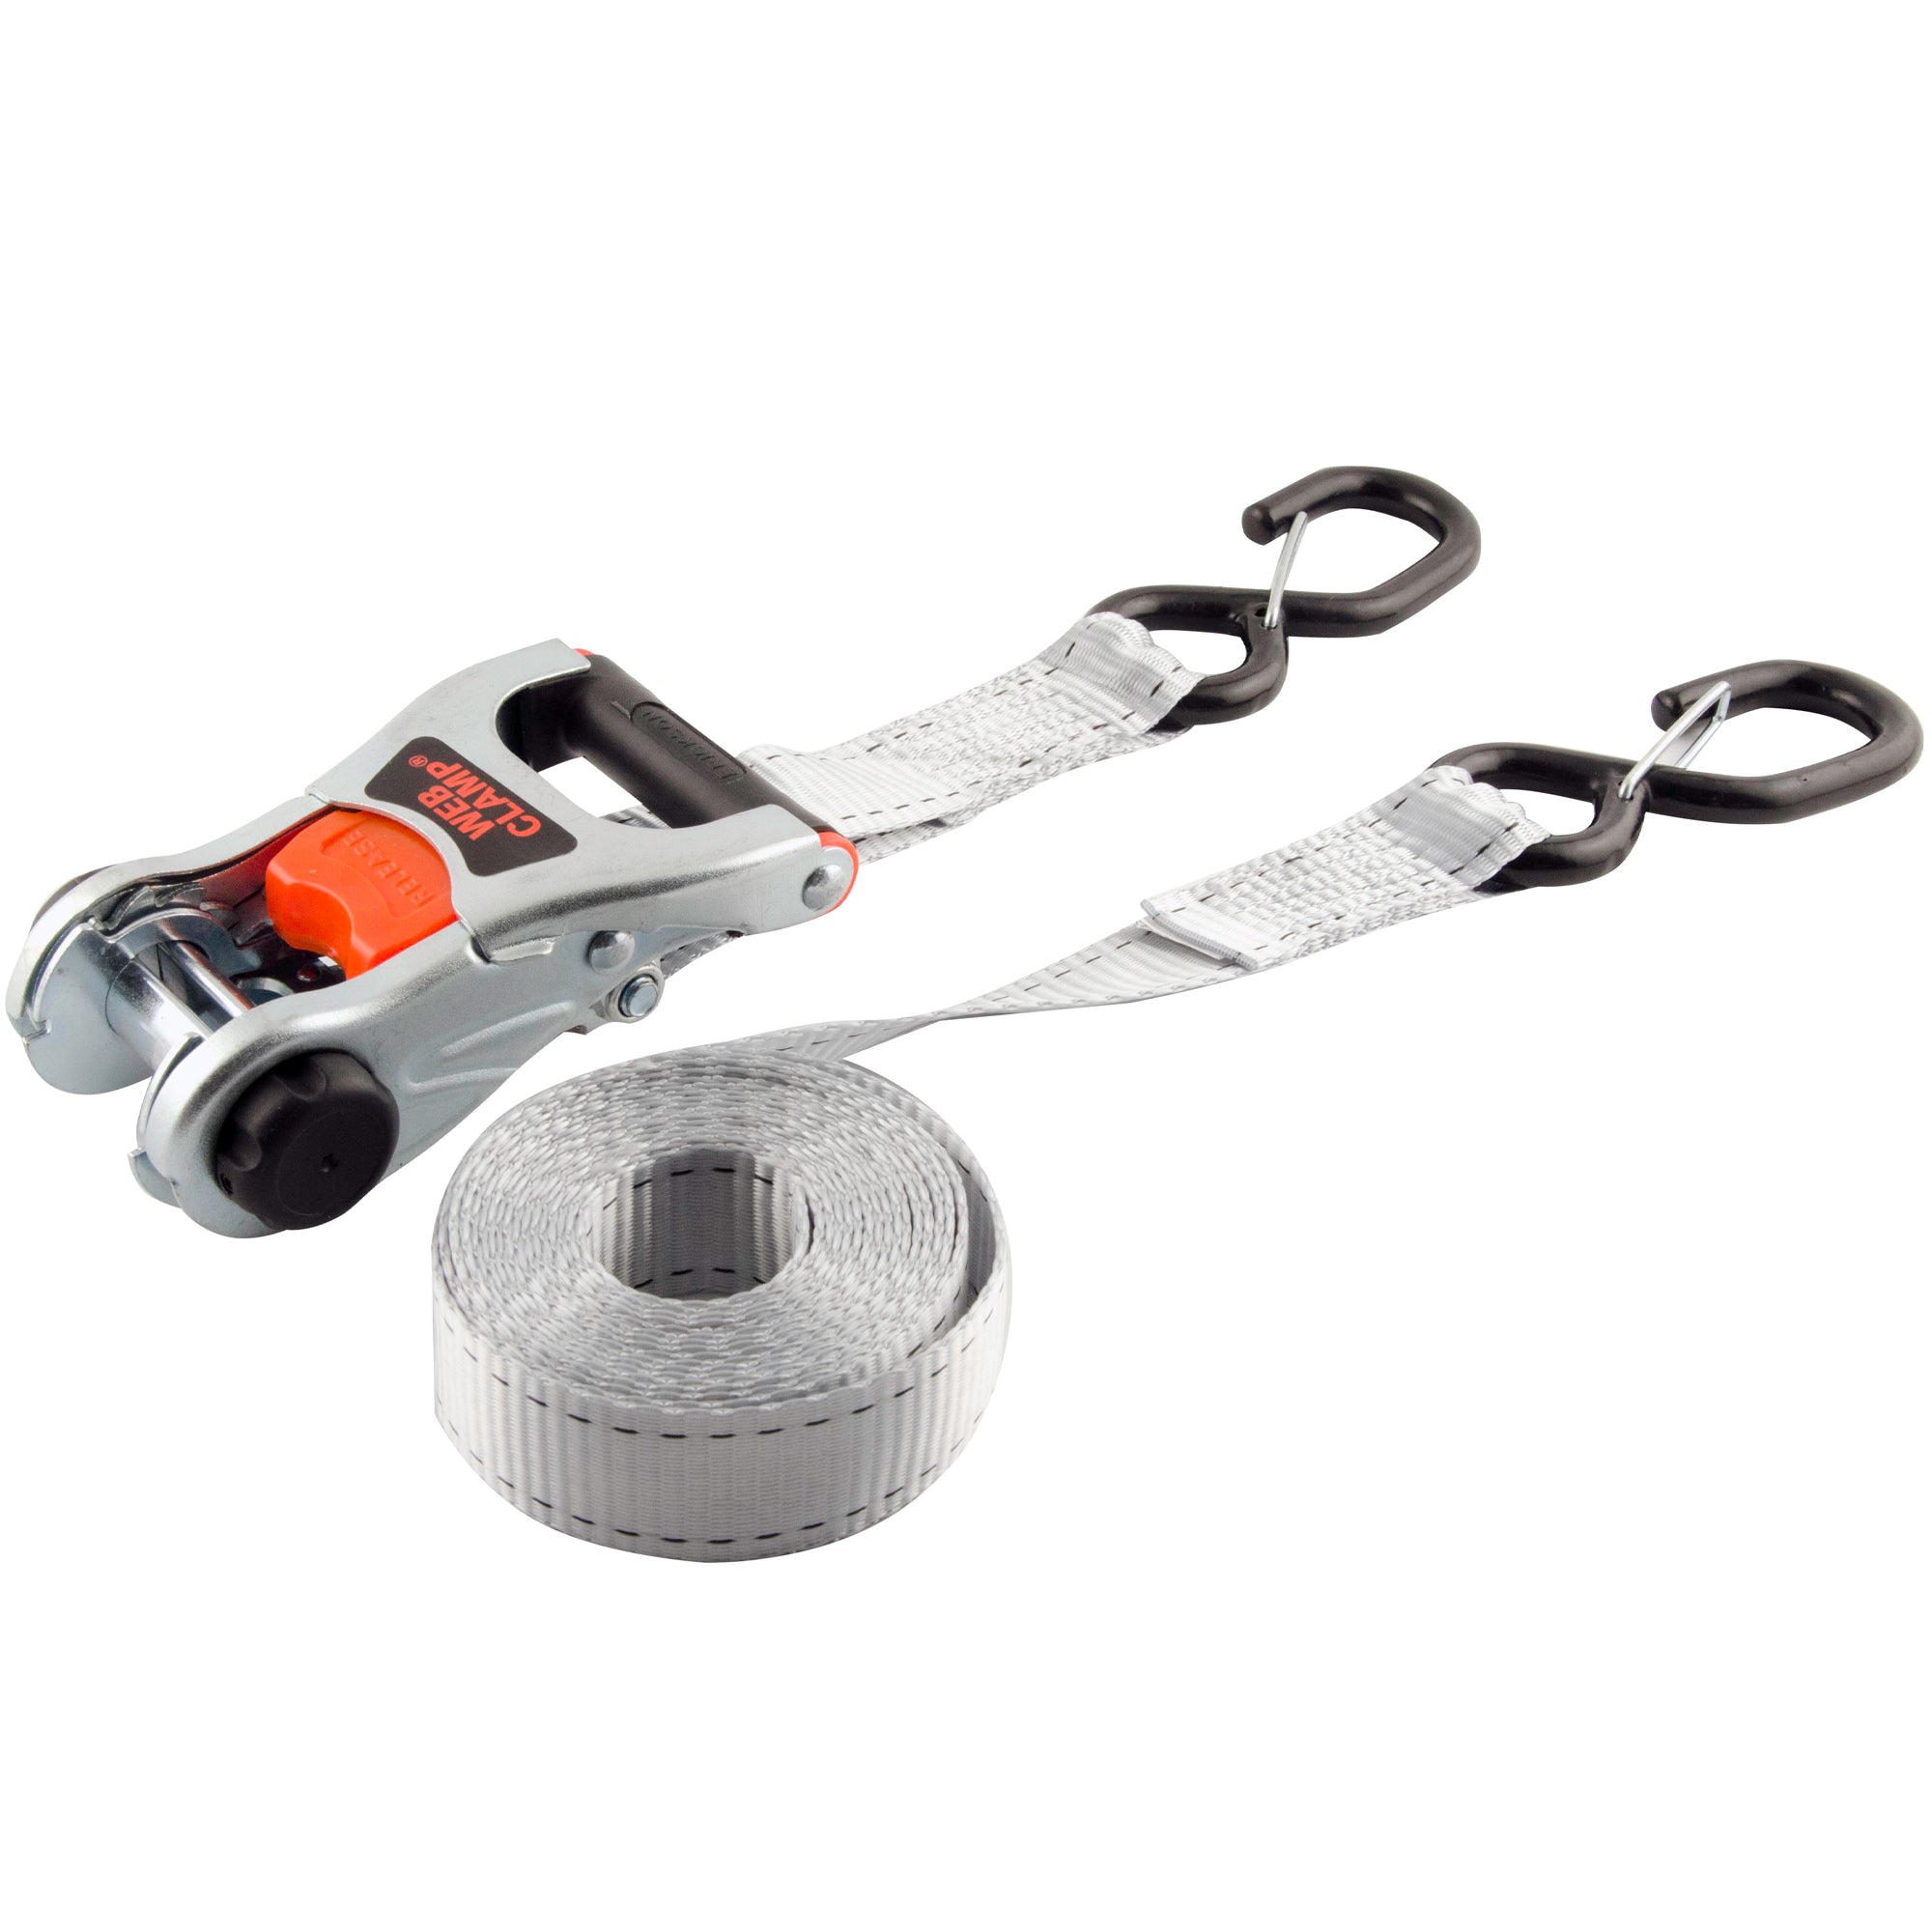 Tie Downs Ratchet Strap Soft Grip Gray with Cap Lock 1 1/4"X12' 2000 Lb 2 Pack